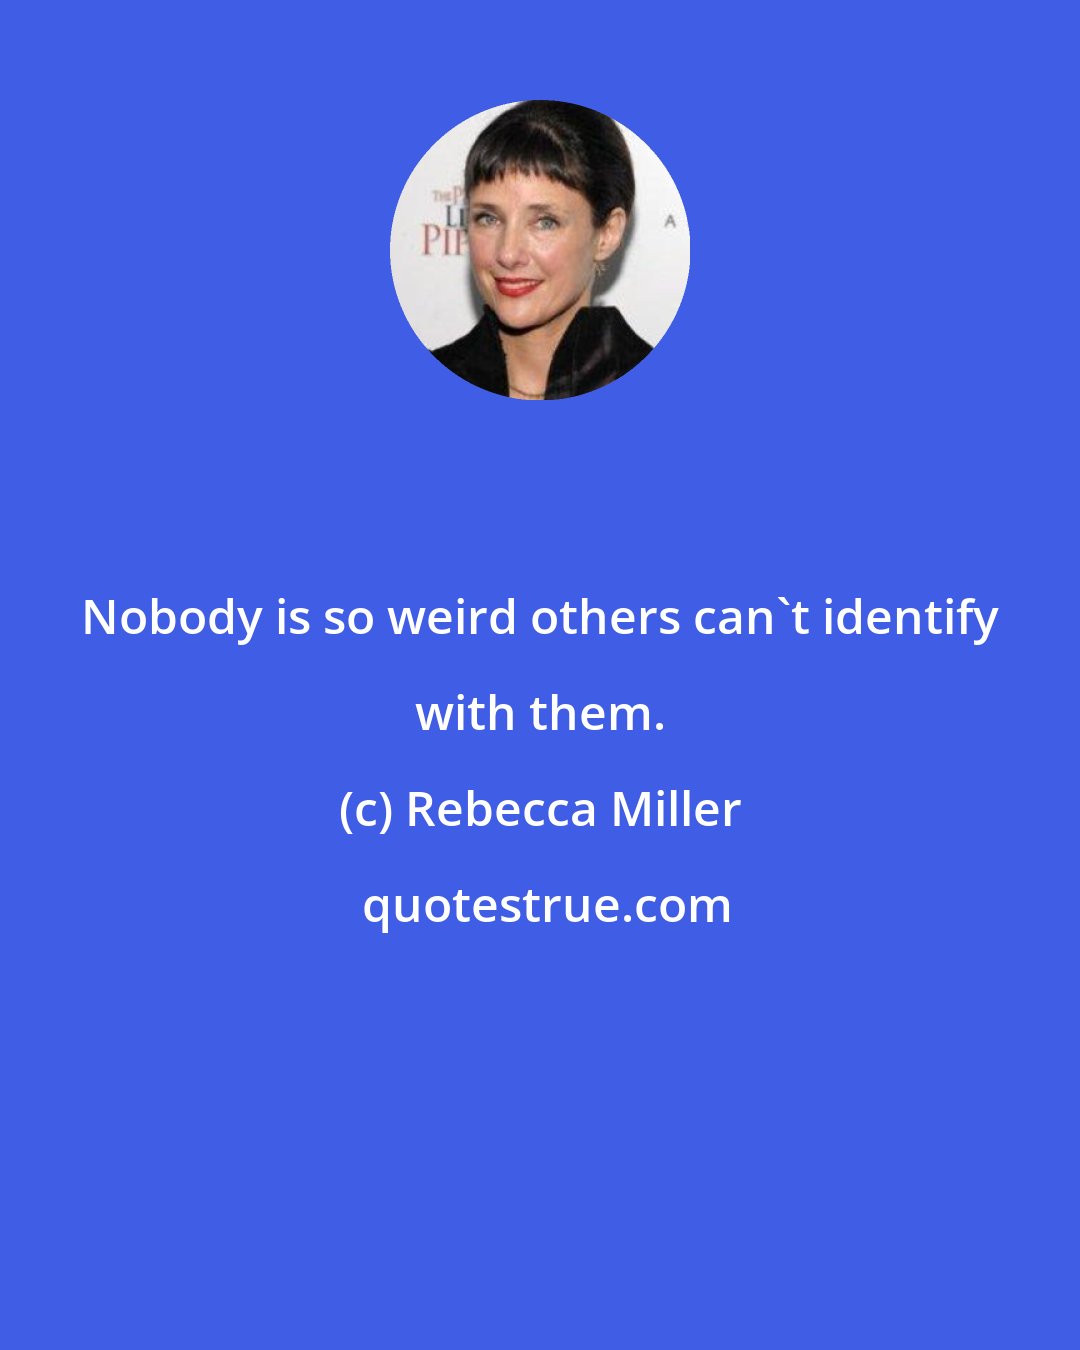 Rebecca Miller: Nobody is so weird others can't identify with them.